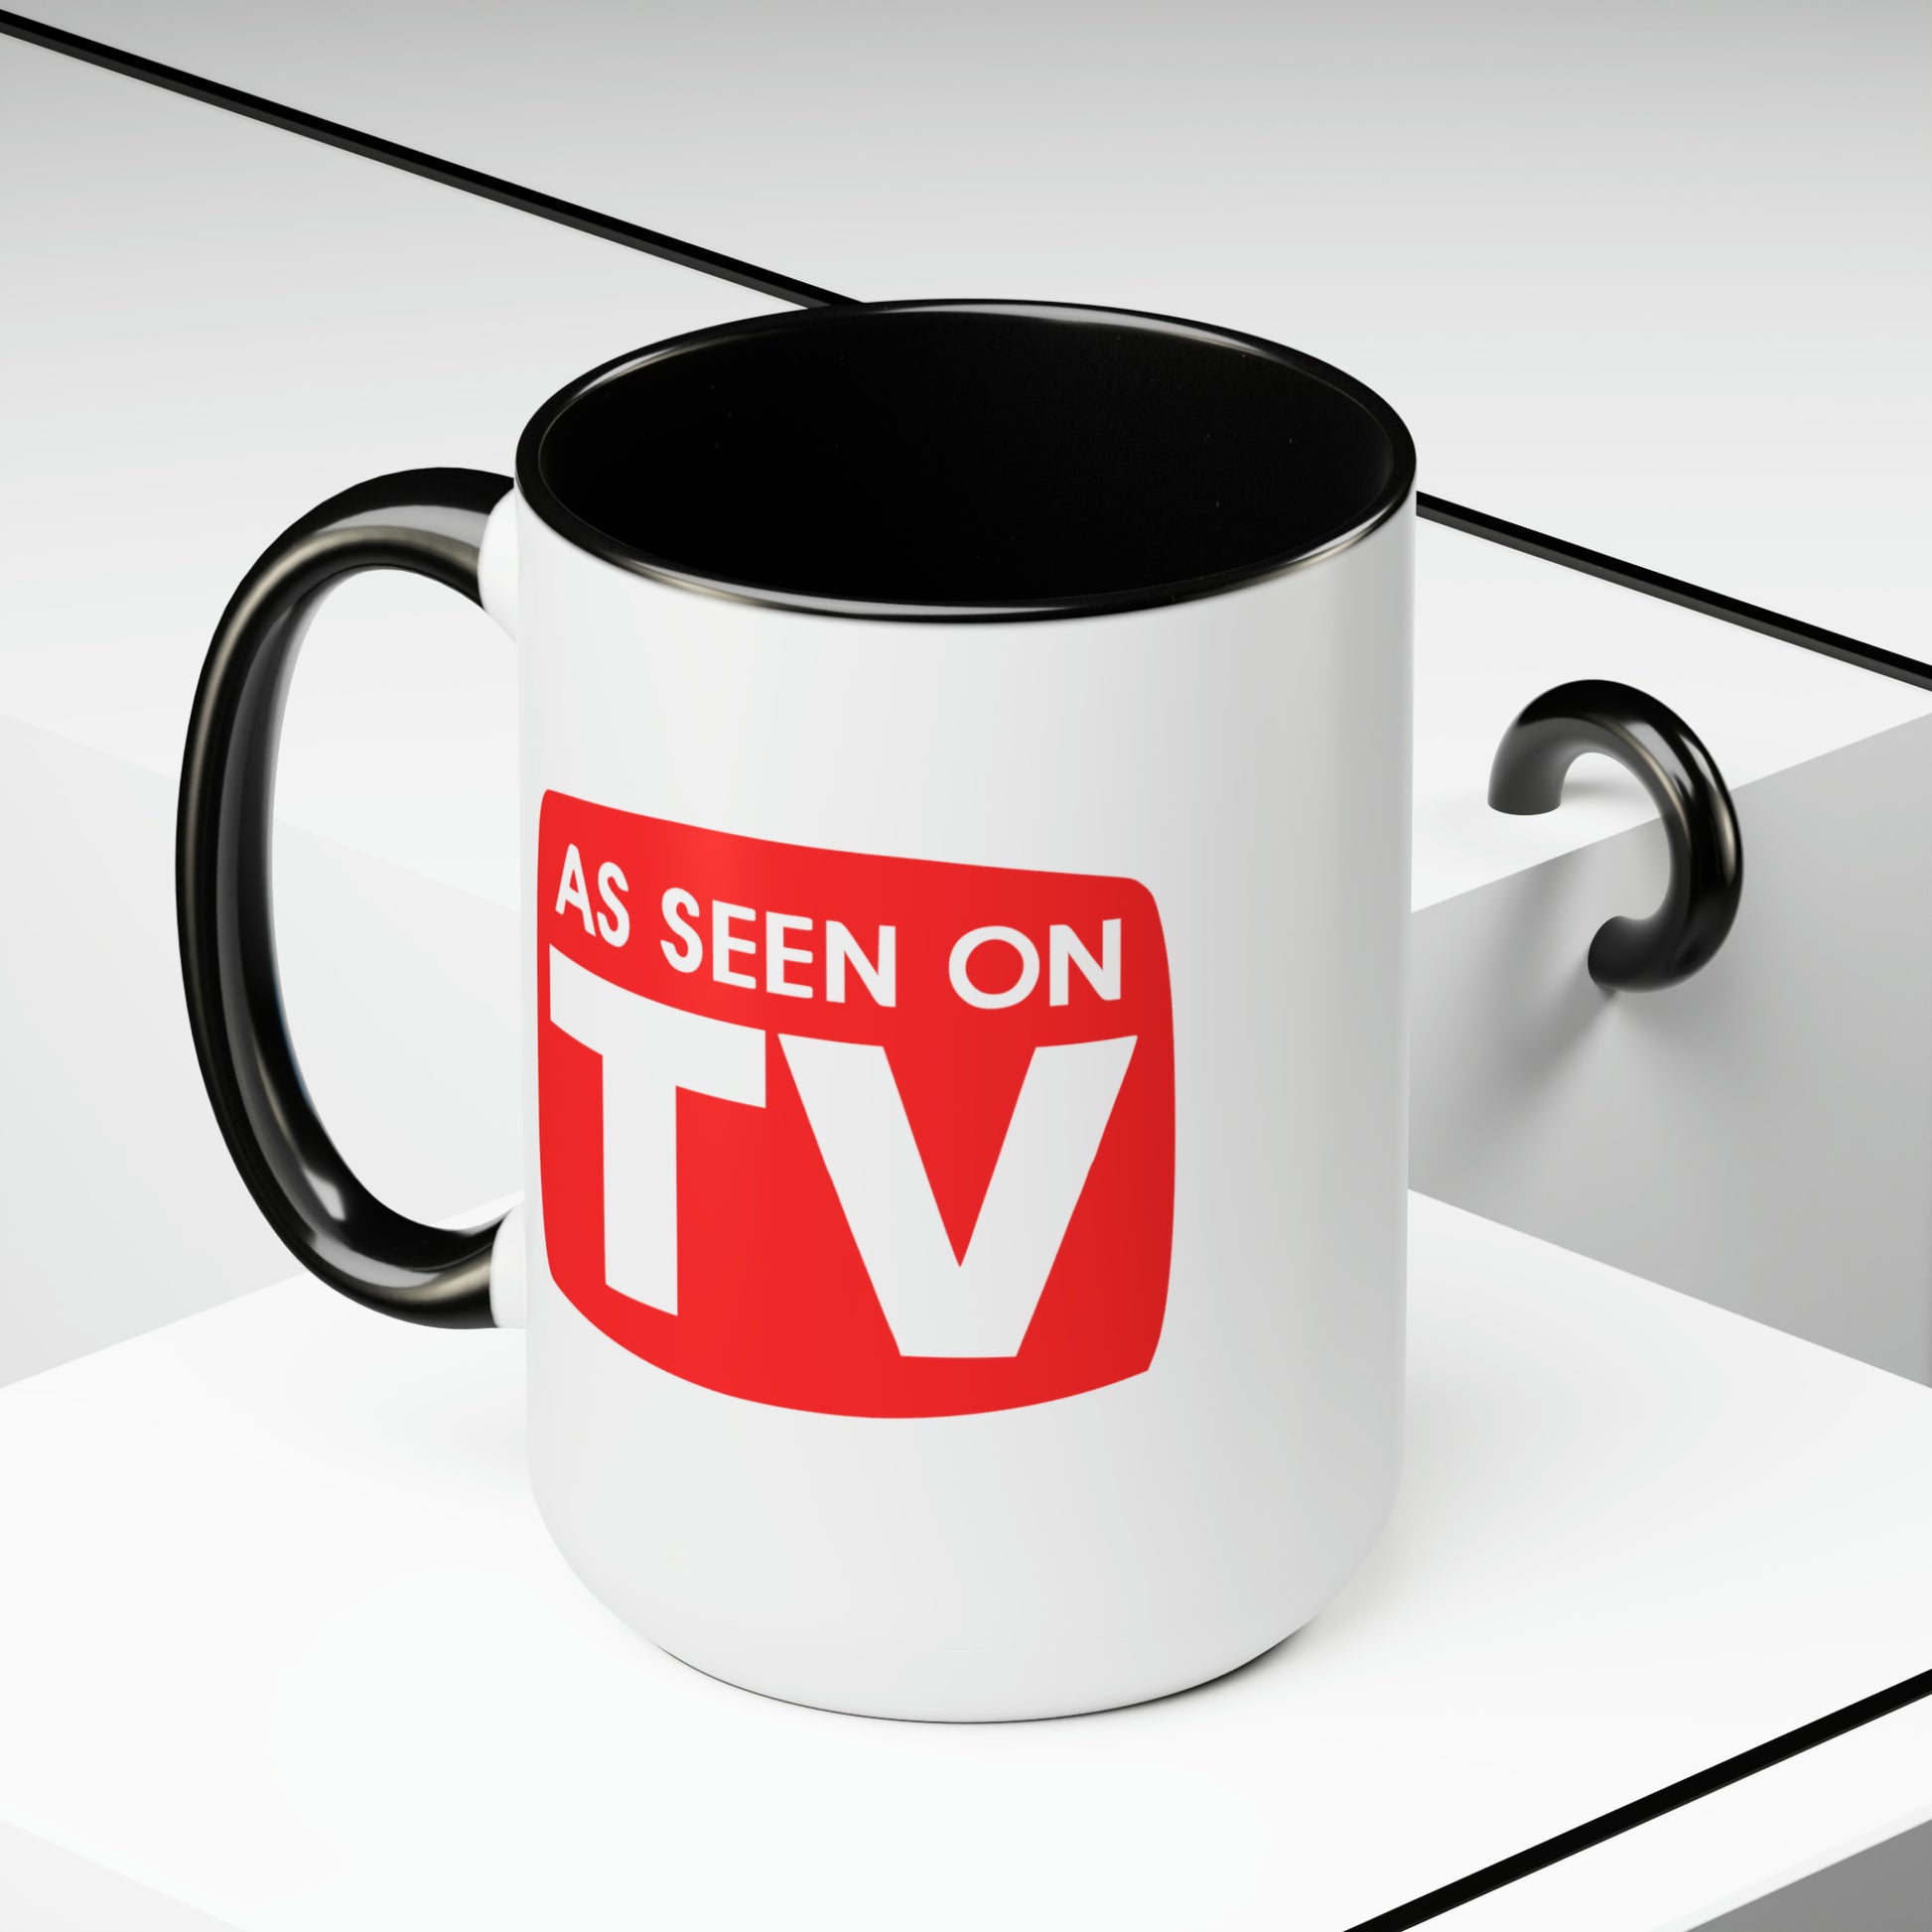 As Seen on TV Coffee Mug - Double Sided Black Accent White Ceramic 15oz by TheGlassyLass.com